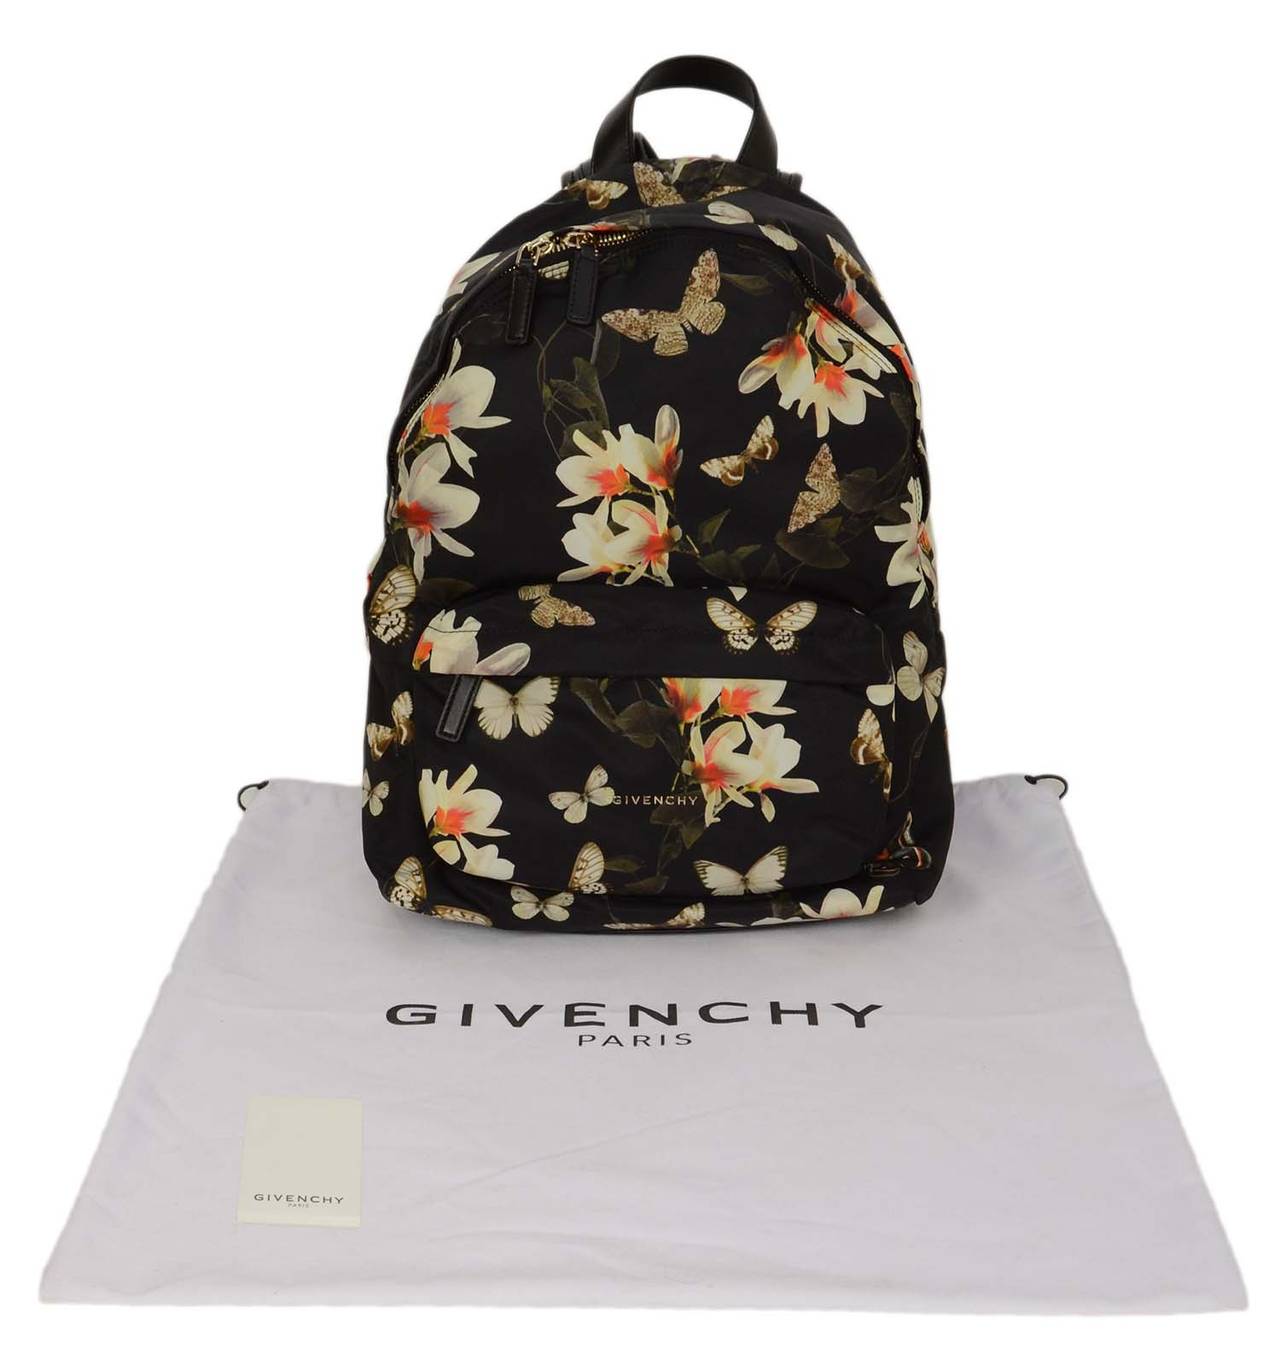 GIVENCHY Floral & Butterfly Print Black Nylon Backpack rt $1, 320